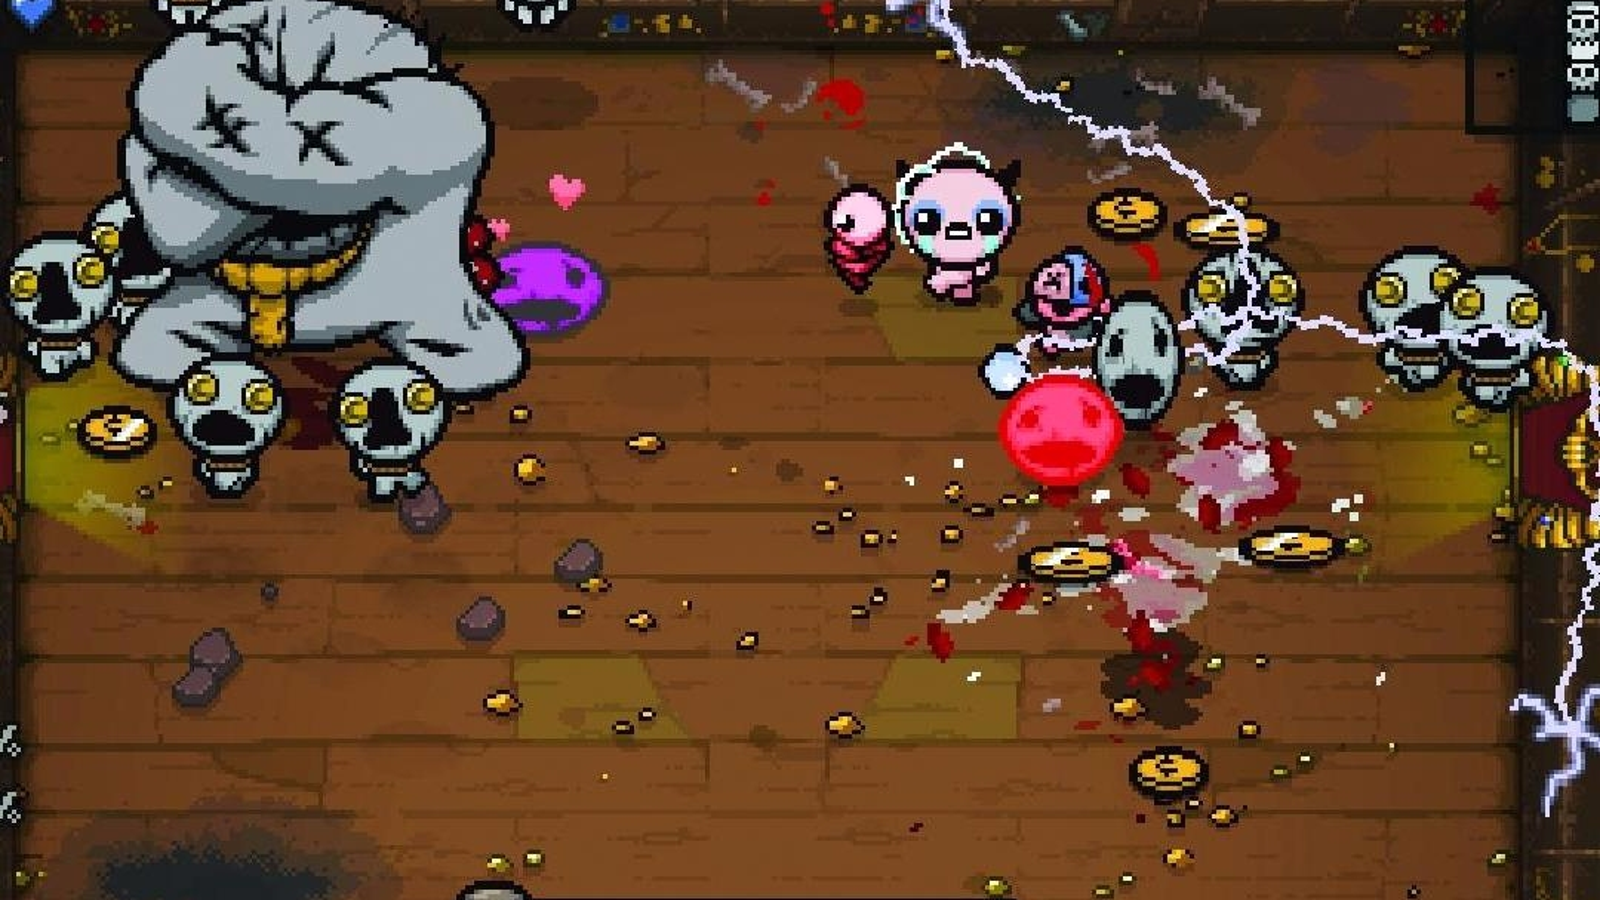 The Binding of Isaac: Afterbirth+ Switch retail release confirmed